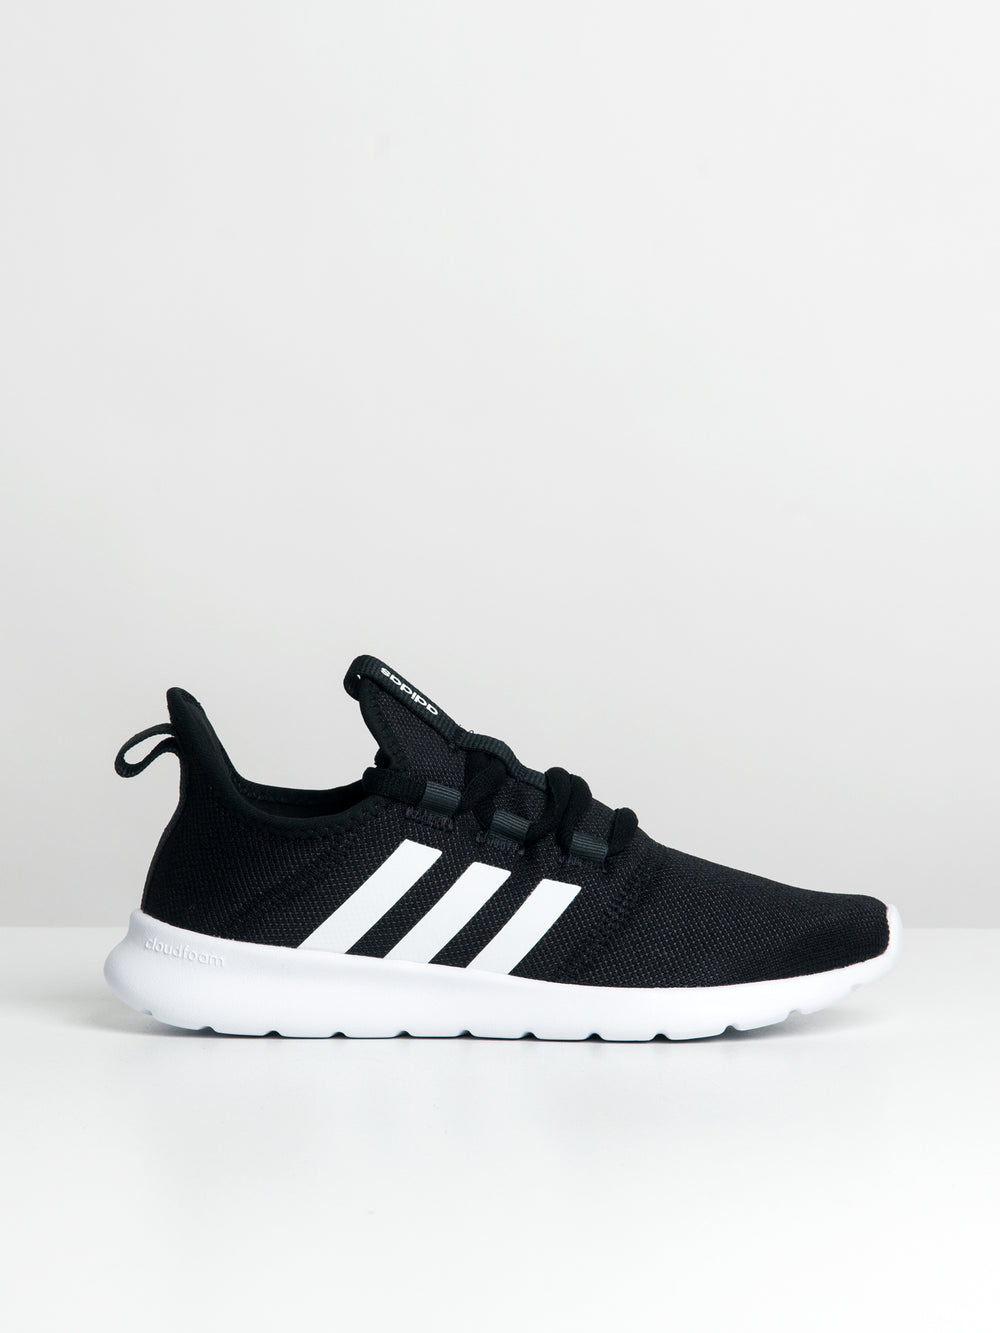 Top more than 210 adidas sneakers women